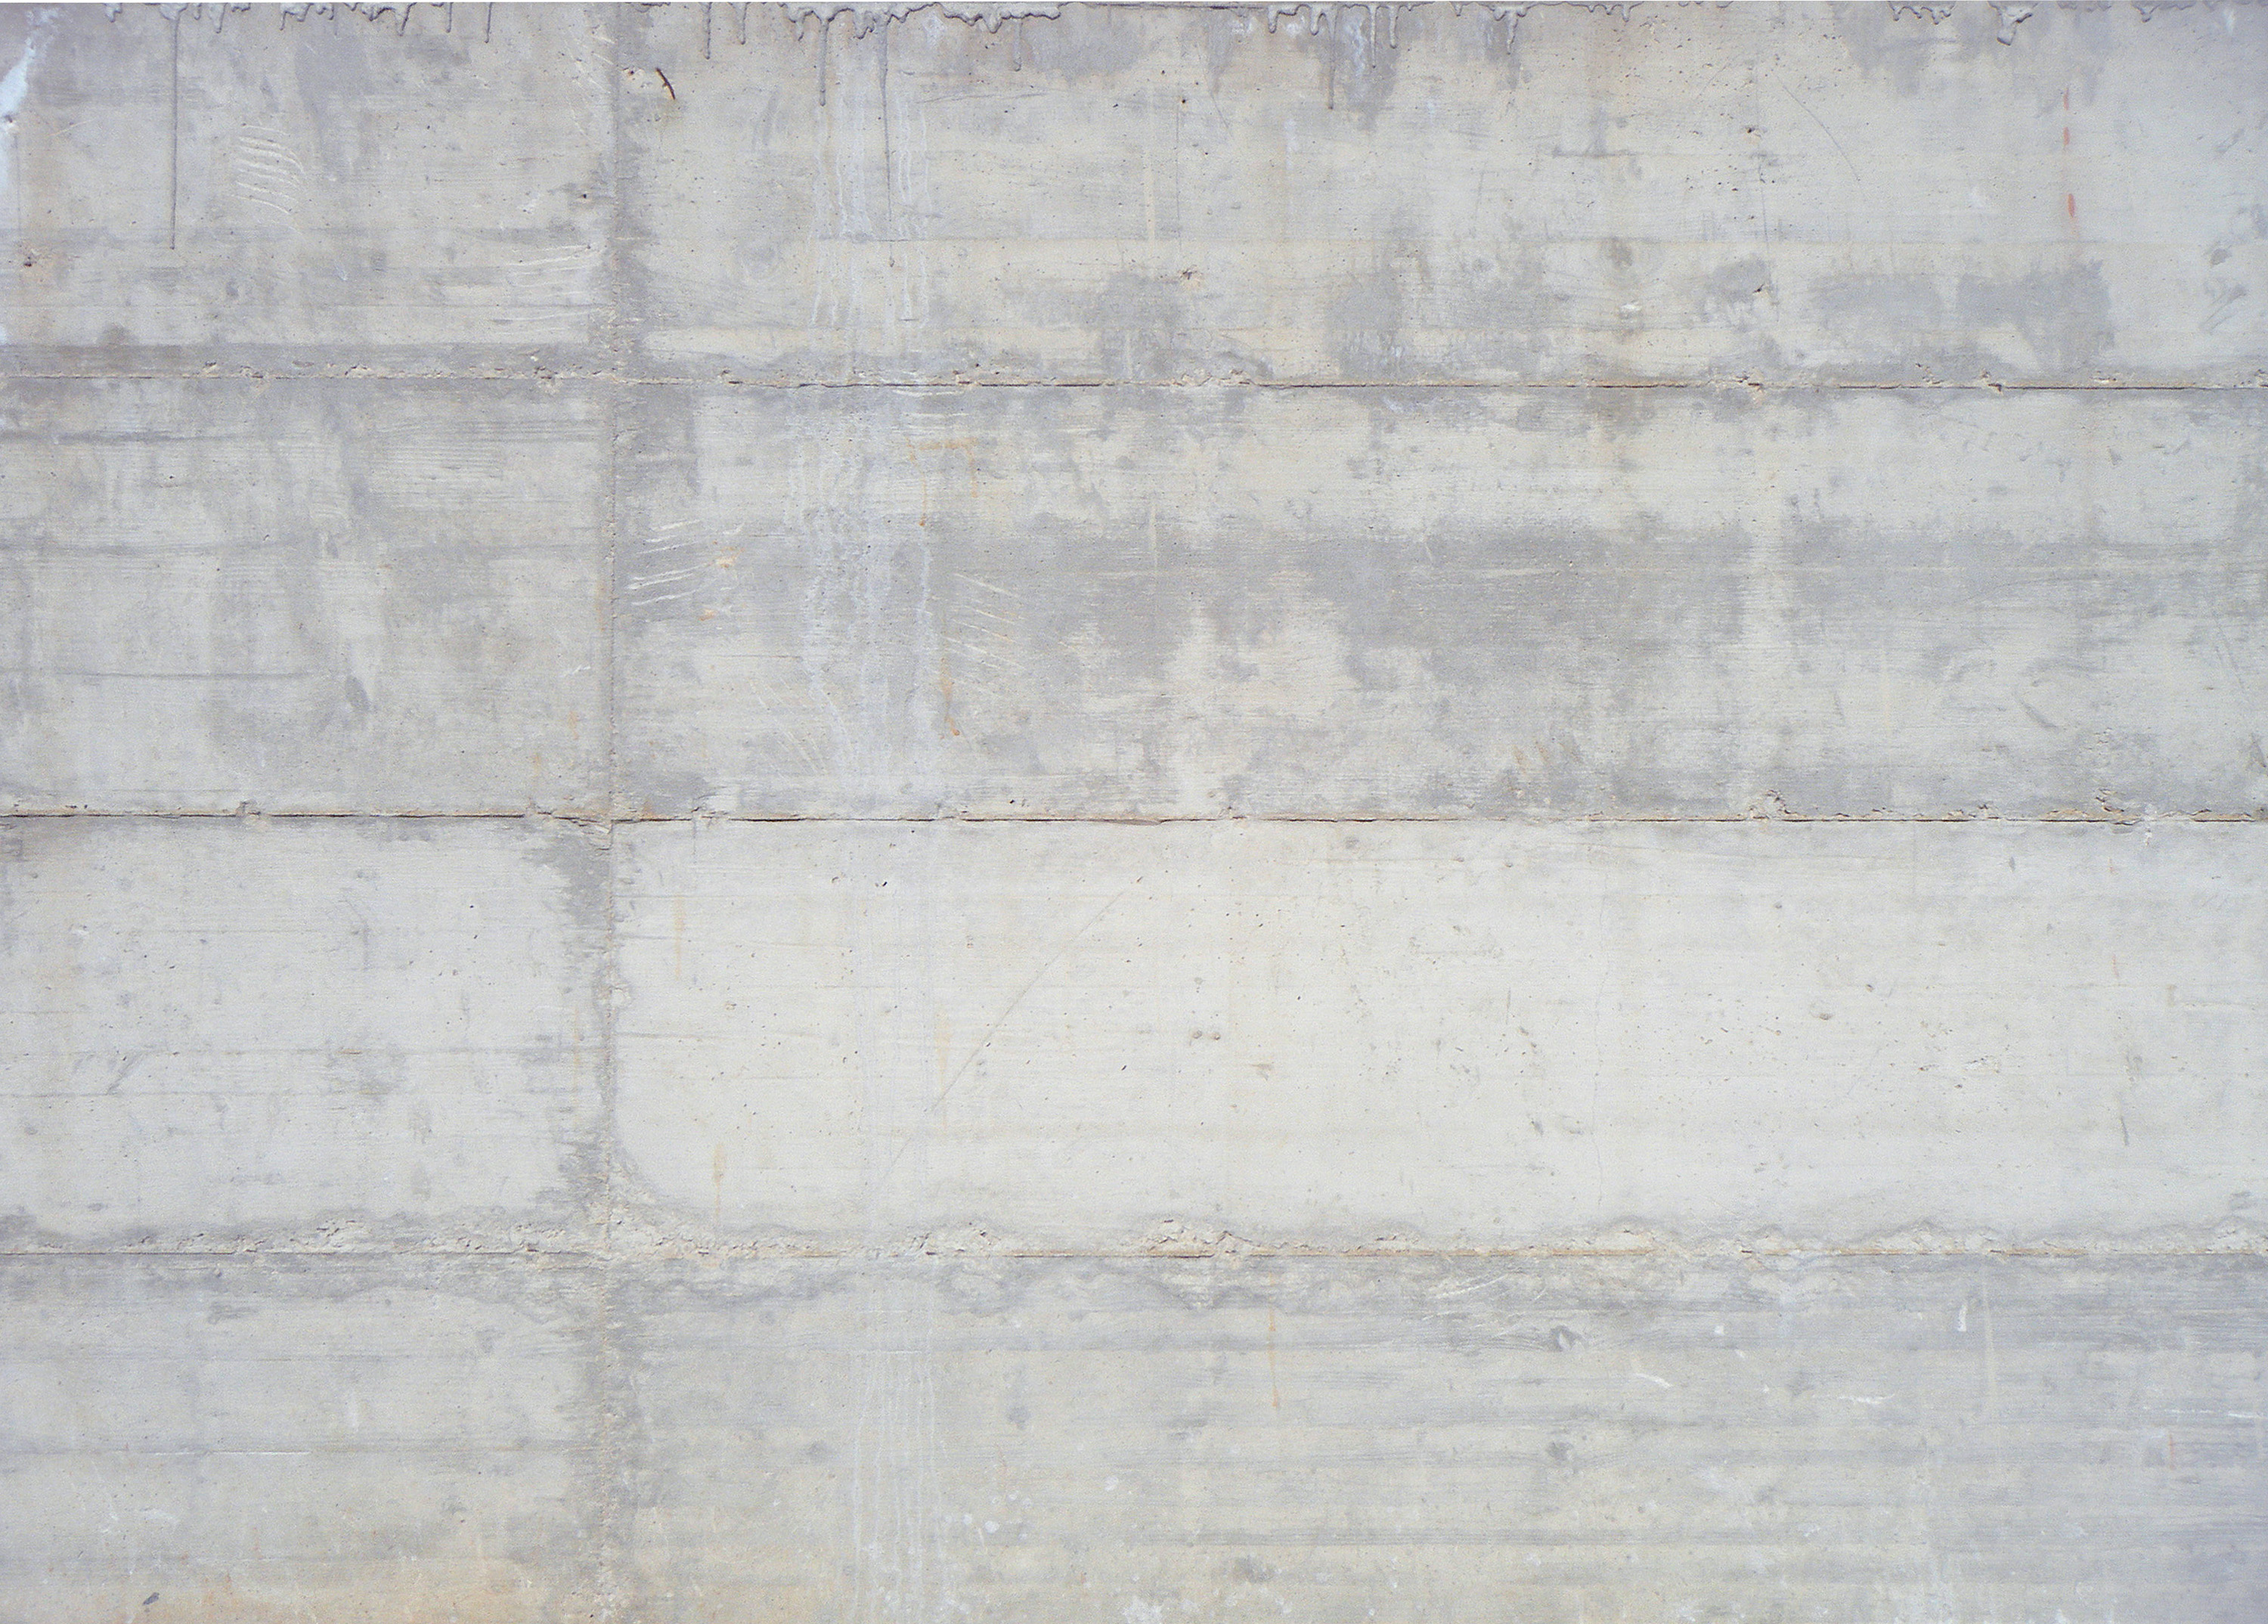 Powerful Concrete Walls 7 Free HQ Wall Textures Downloadable ...